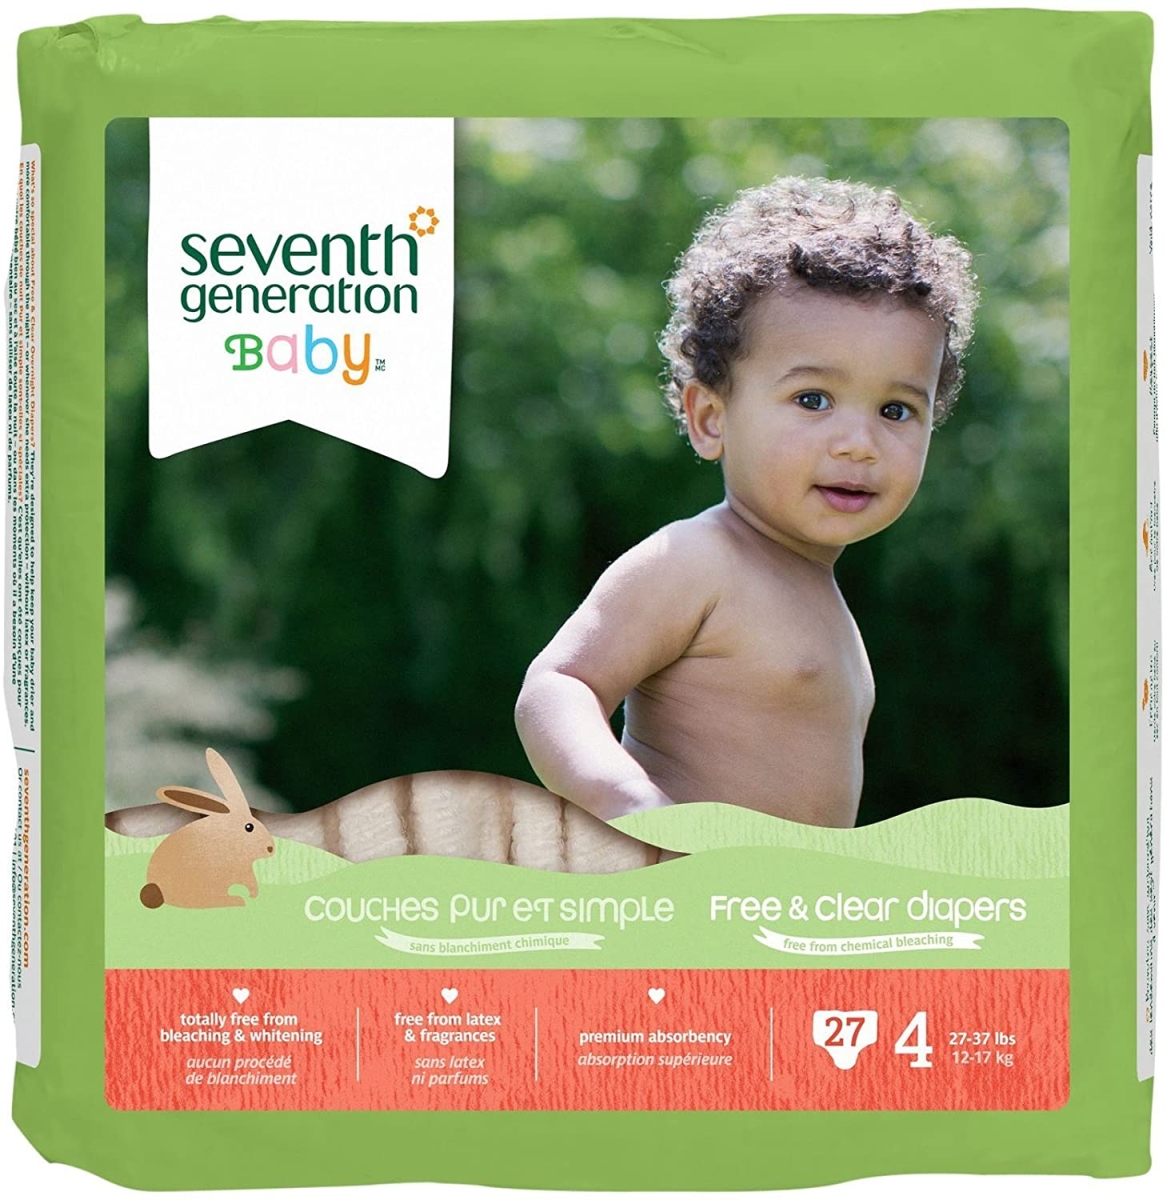 Seventh Generation 2551398 21 lbs Baby Stage 3 Diapers- 27 Count